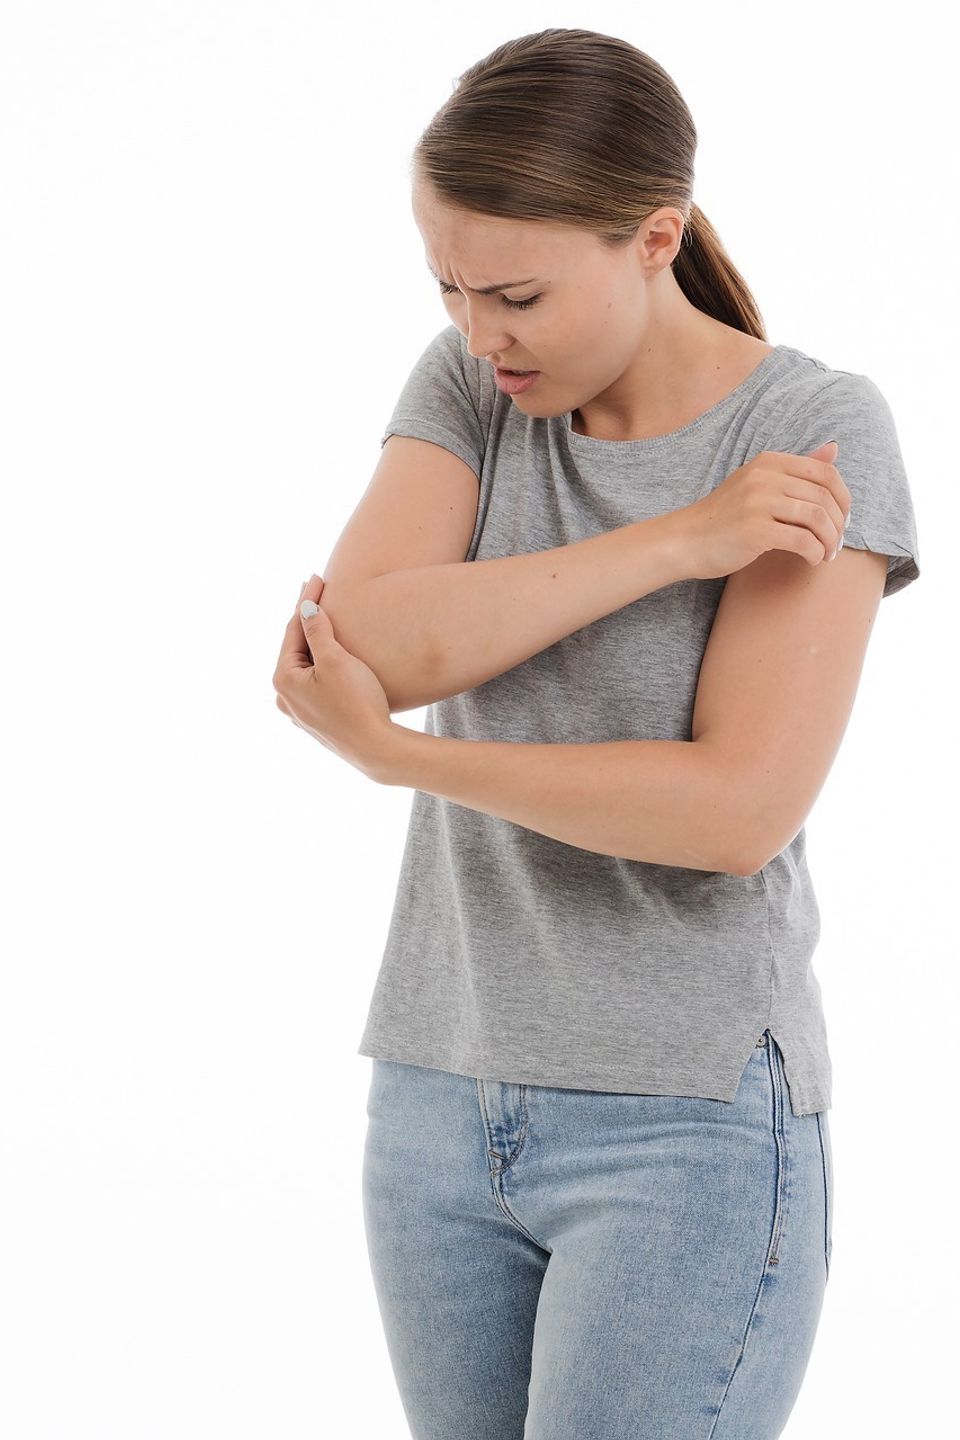 Elbow Pain and Injuries | Annette Billings